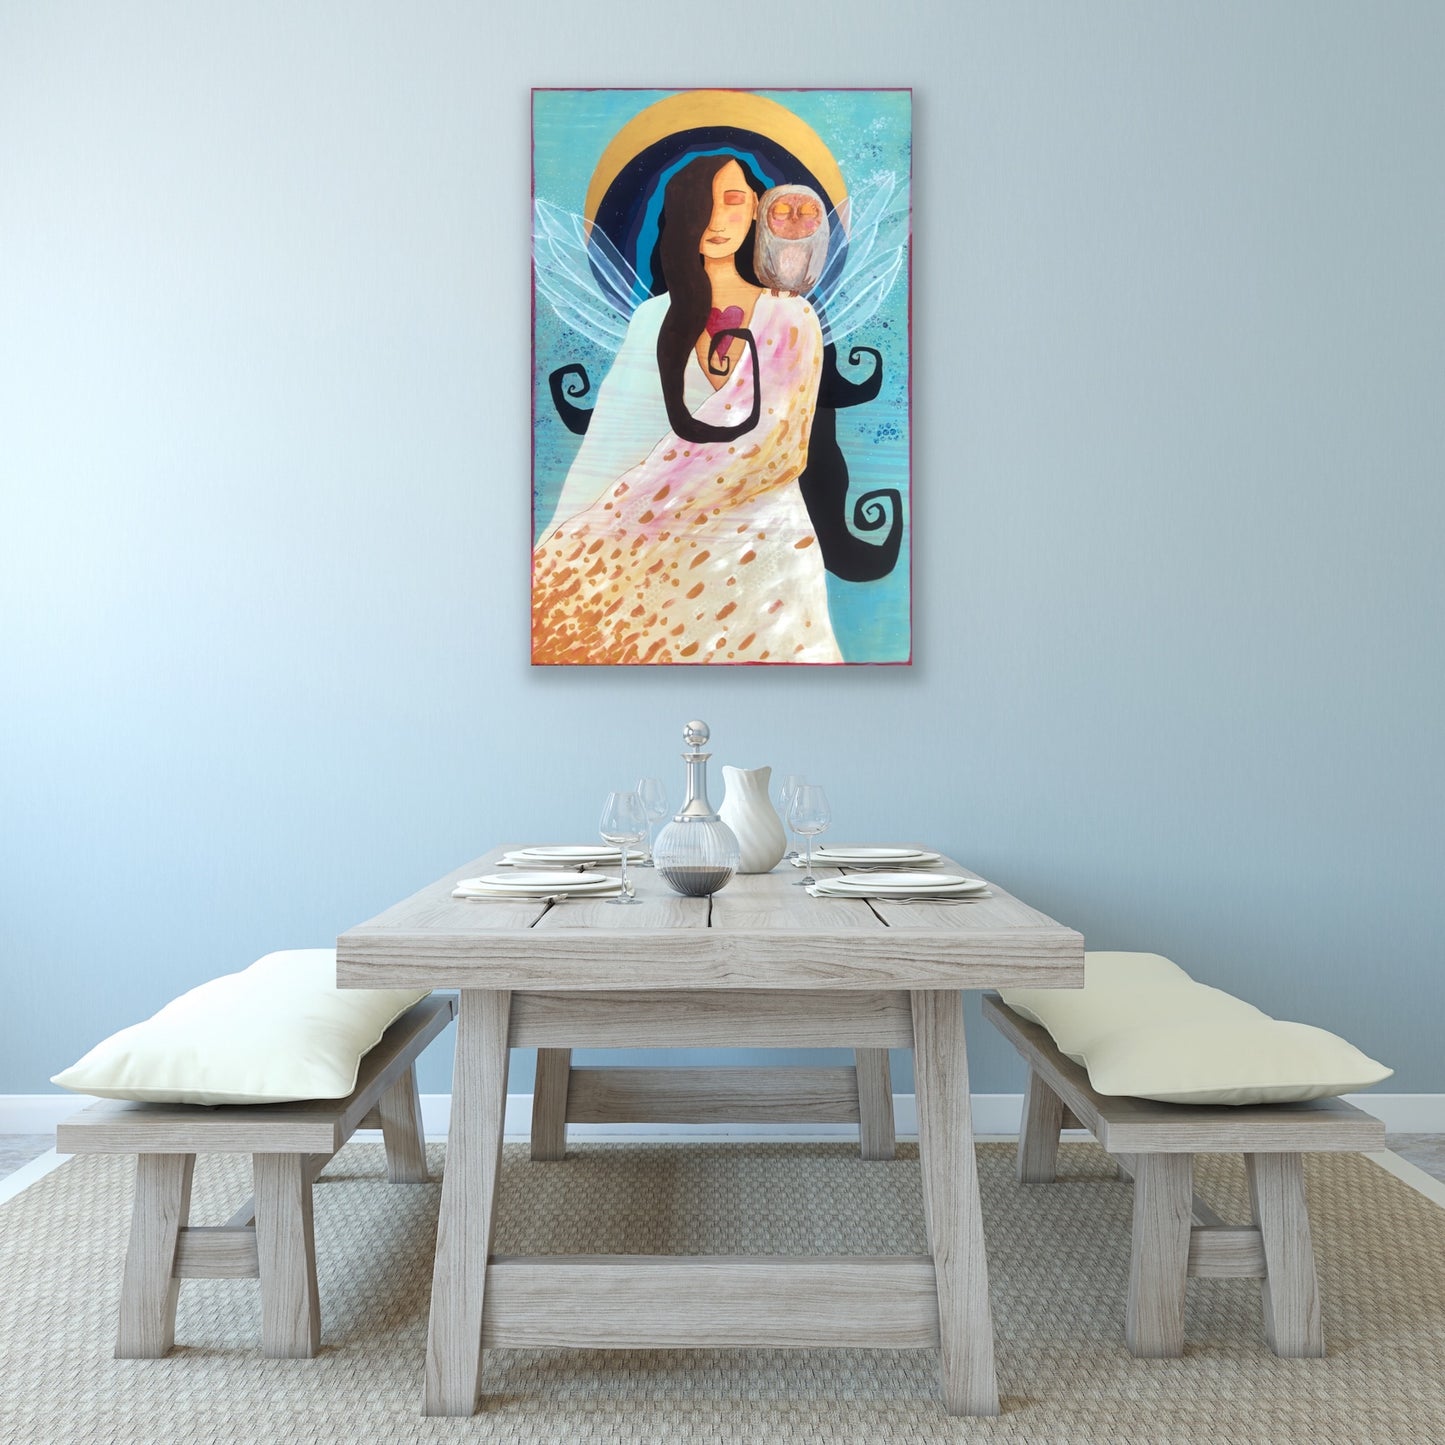 Beautiful spiritual artwork of a white and gold-robed woman with wings  and an owl perched on her shoulder.  The artwork is hanging on a light grey wall over a wooden dinner table with wooden benches and neutral settings and pillows.